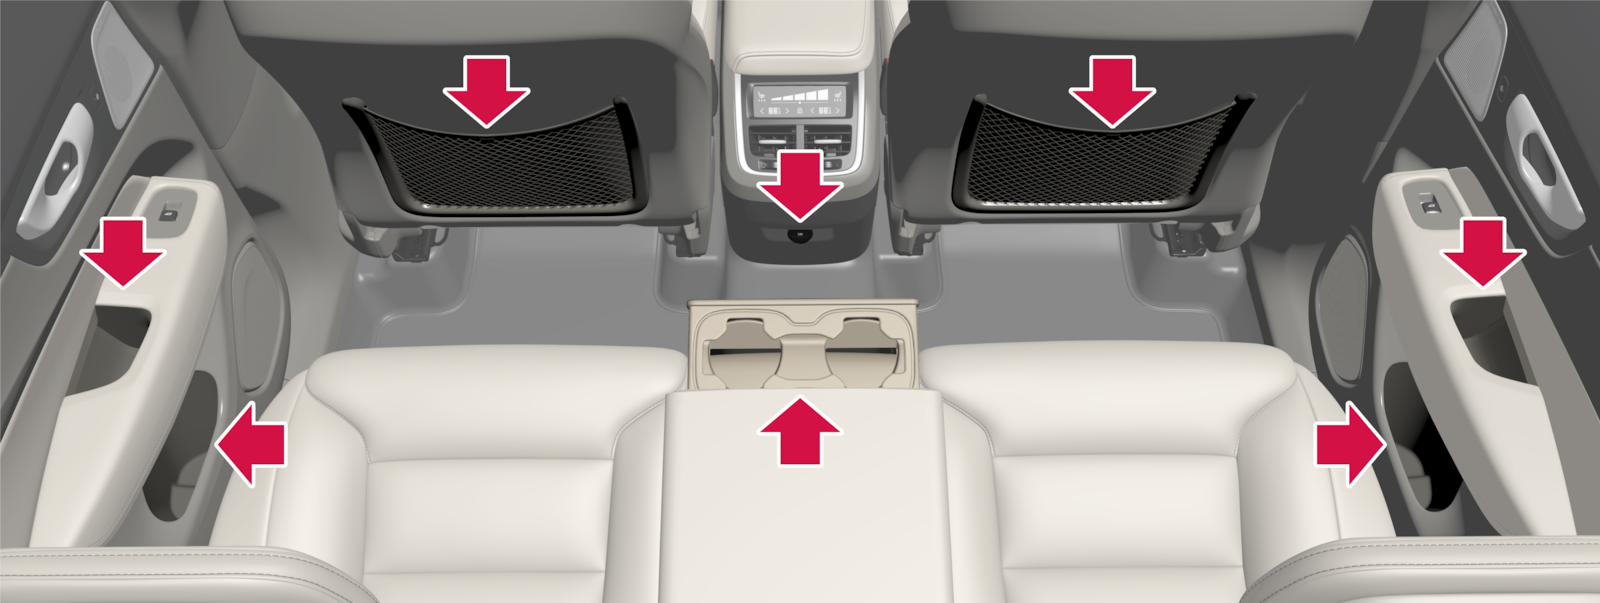 iCup-2317-XC60-Overview interior rear seat